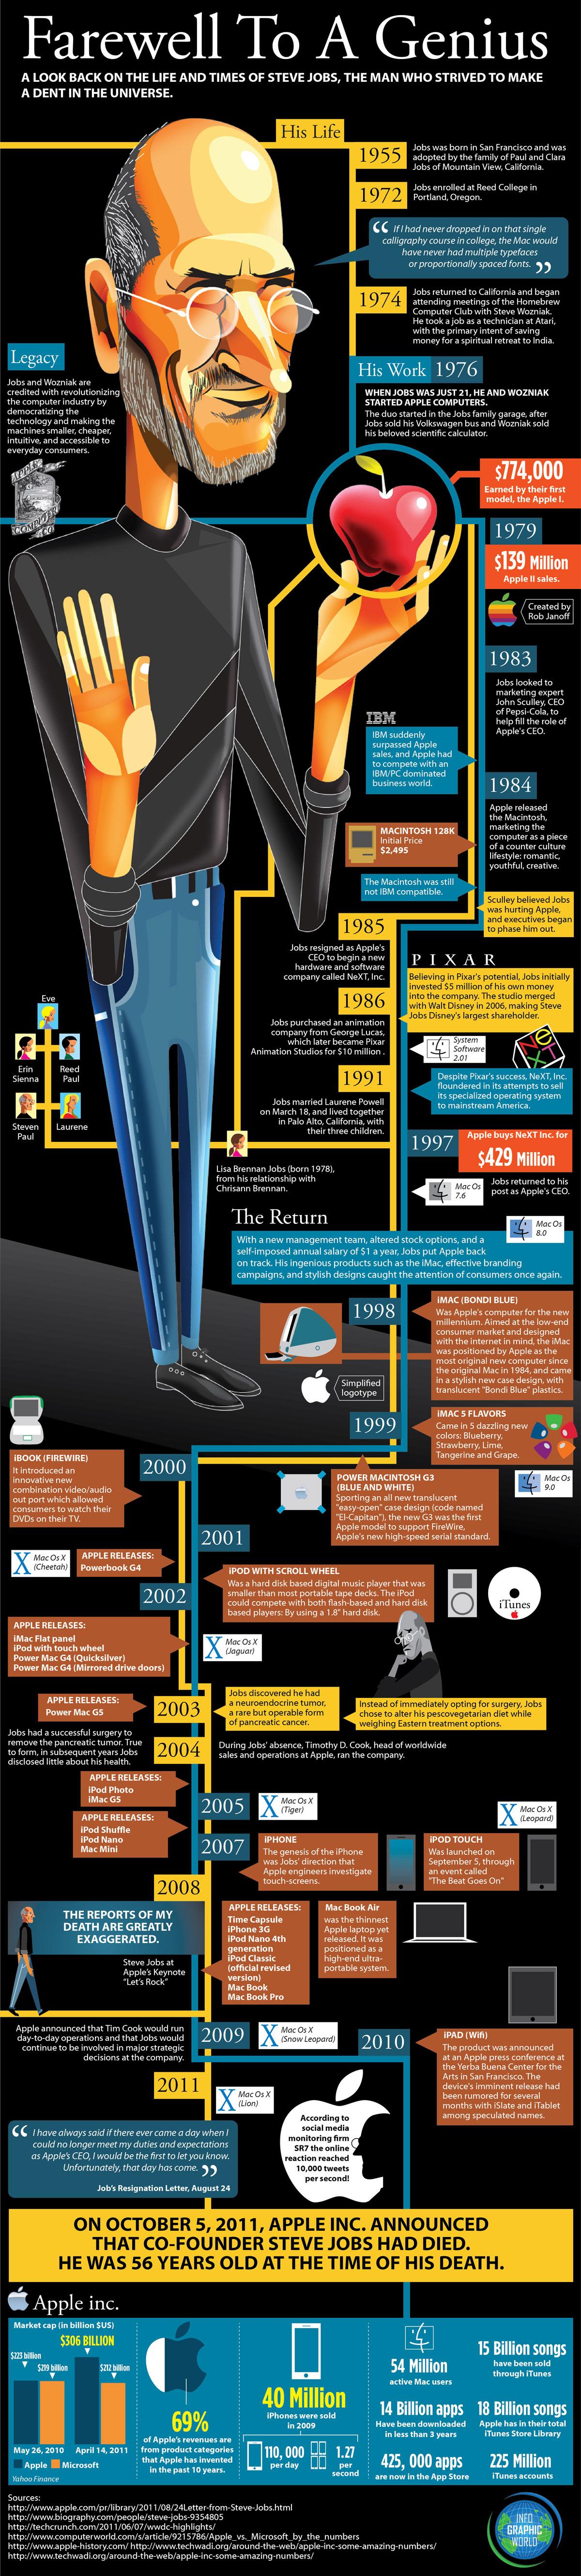 Life and Times of Steve Jobs - Infographic World